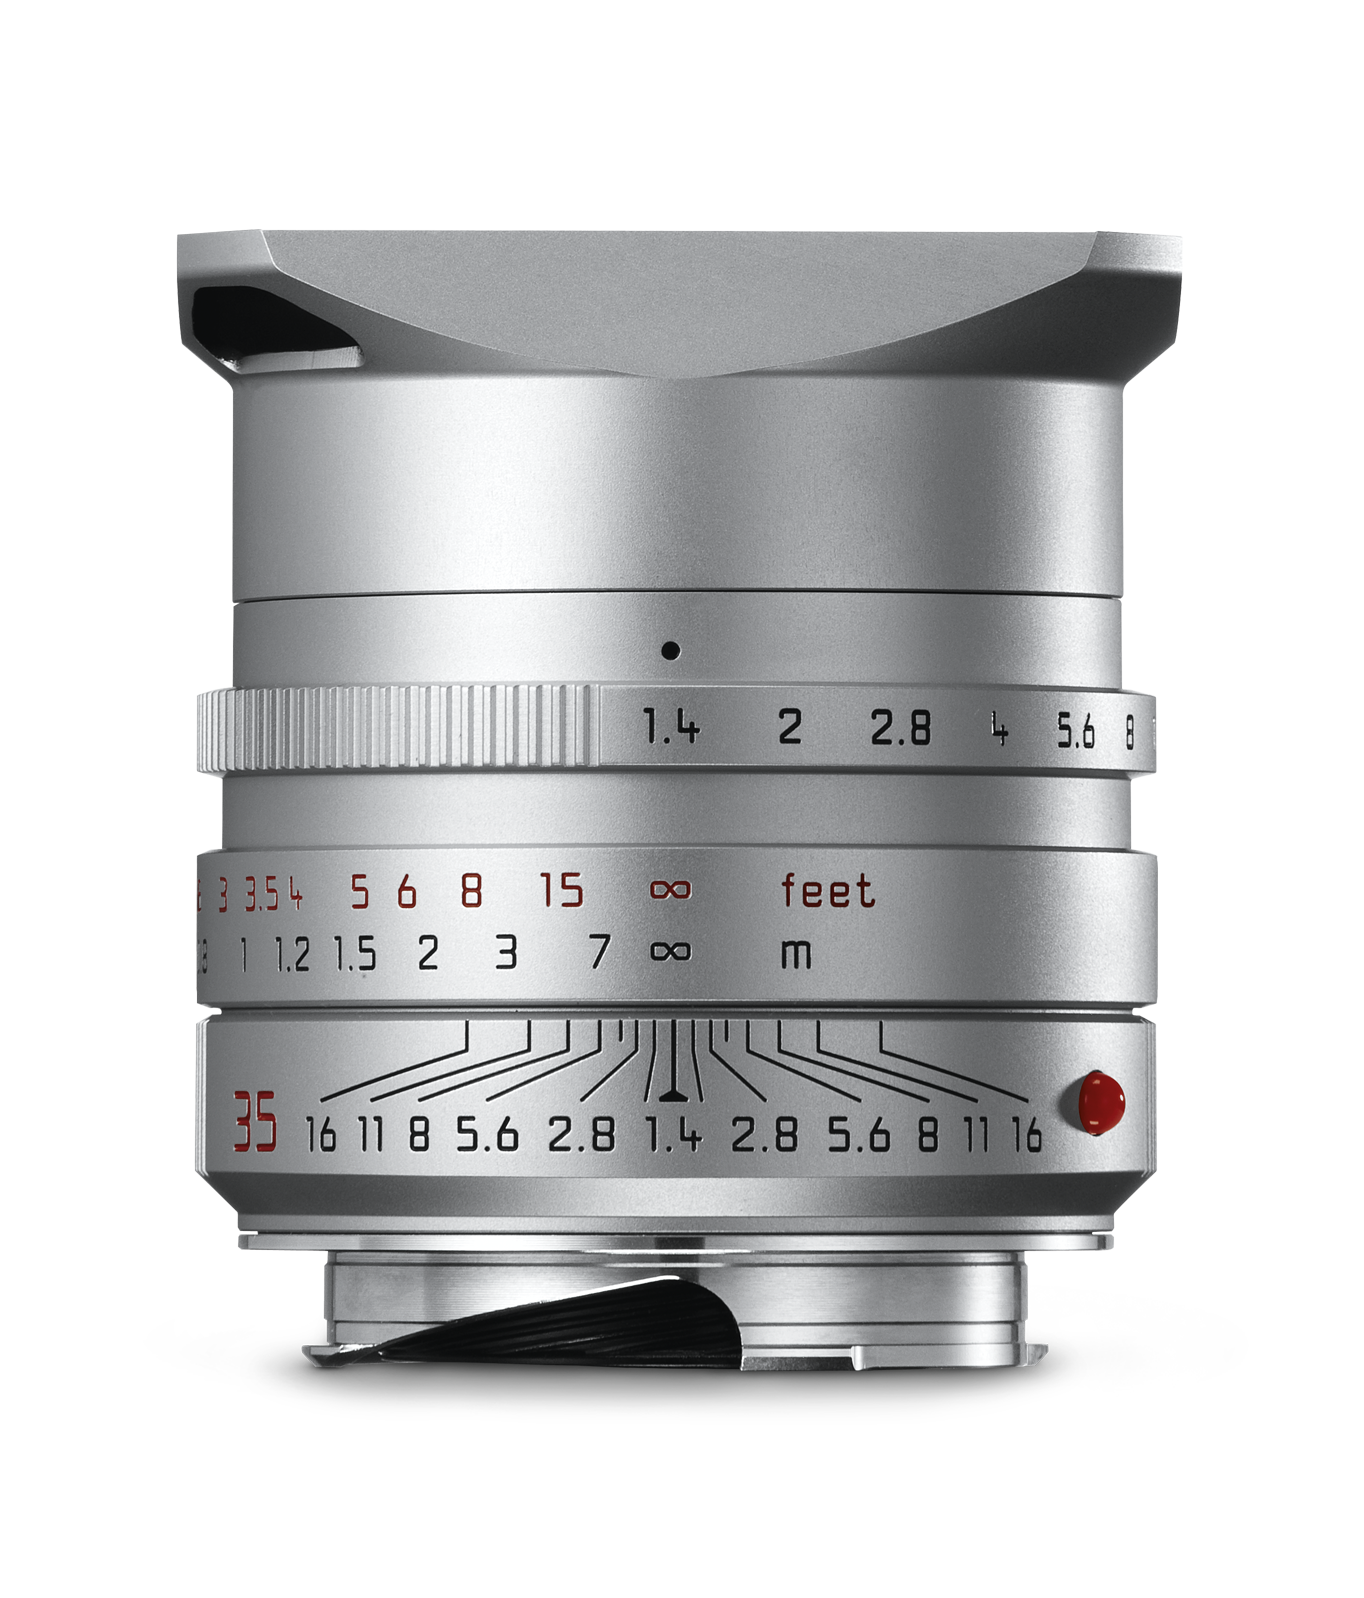 Leica Summilux-M 35mm f/1.4 ASPH. - Overview | Leica Camera US